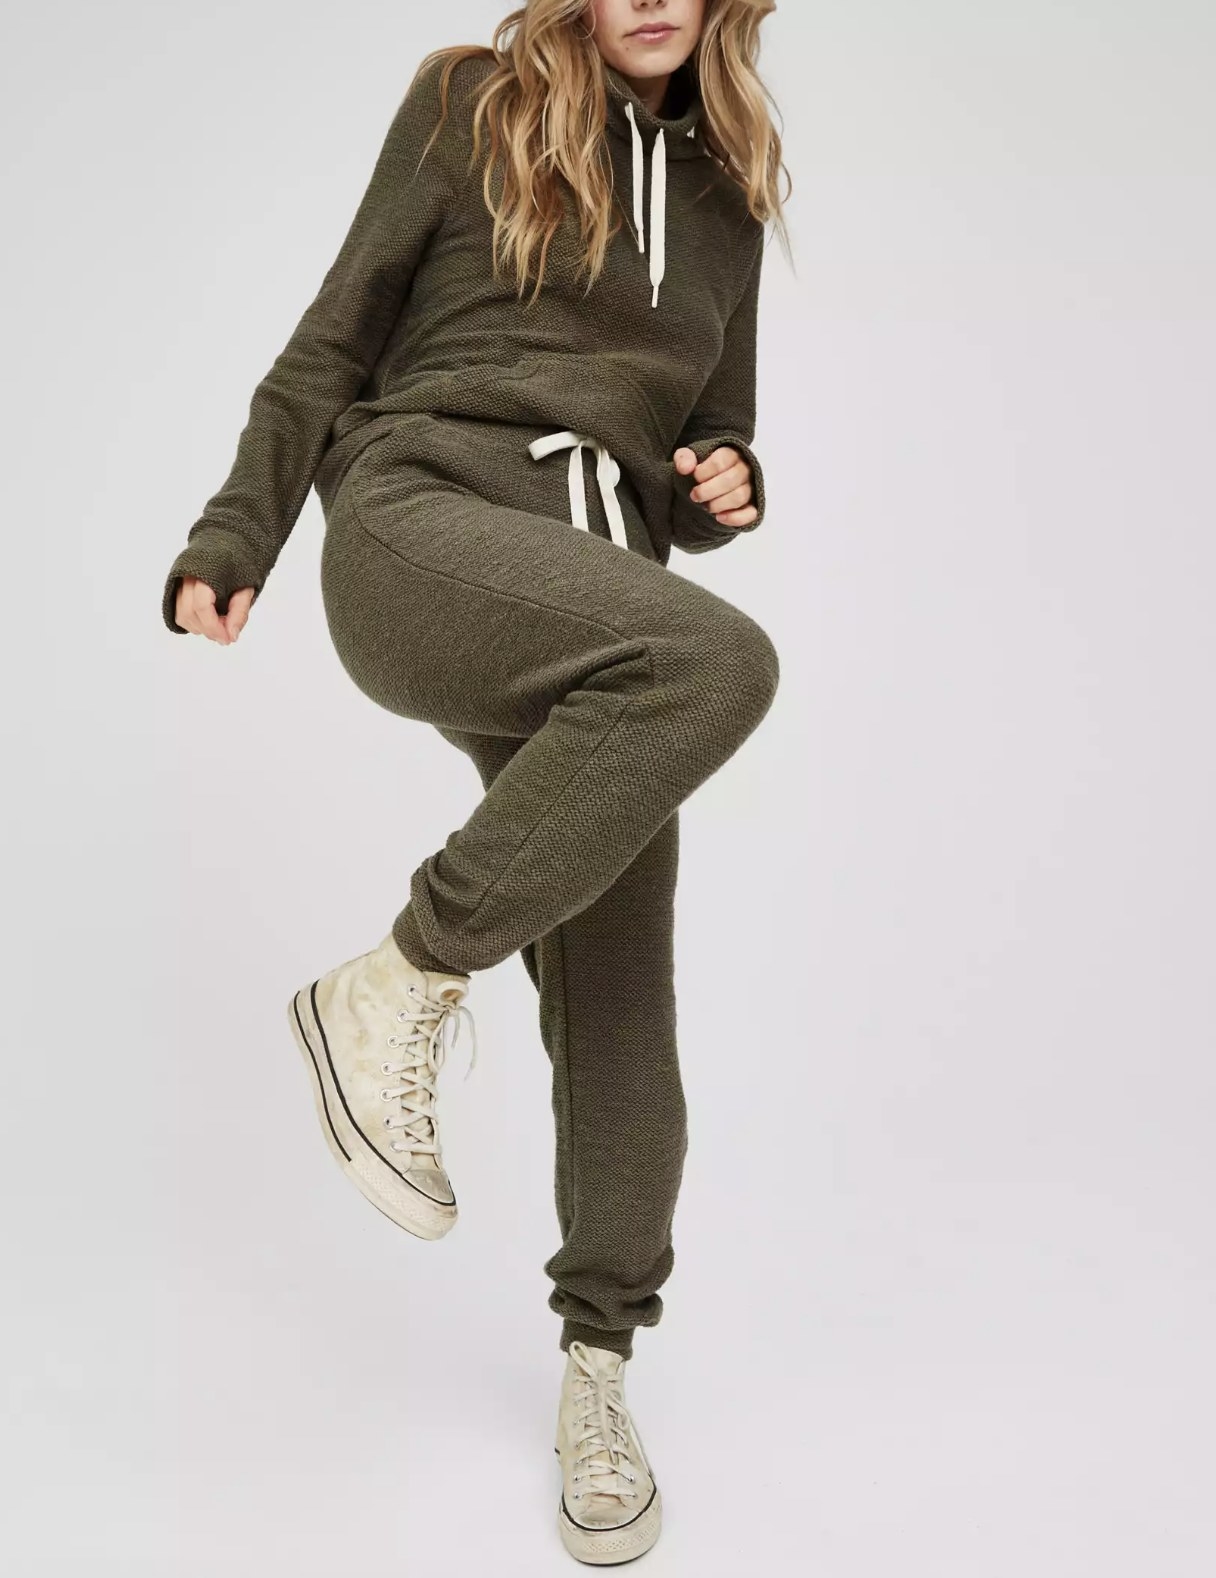 model raising knee in the green joggers